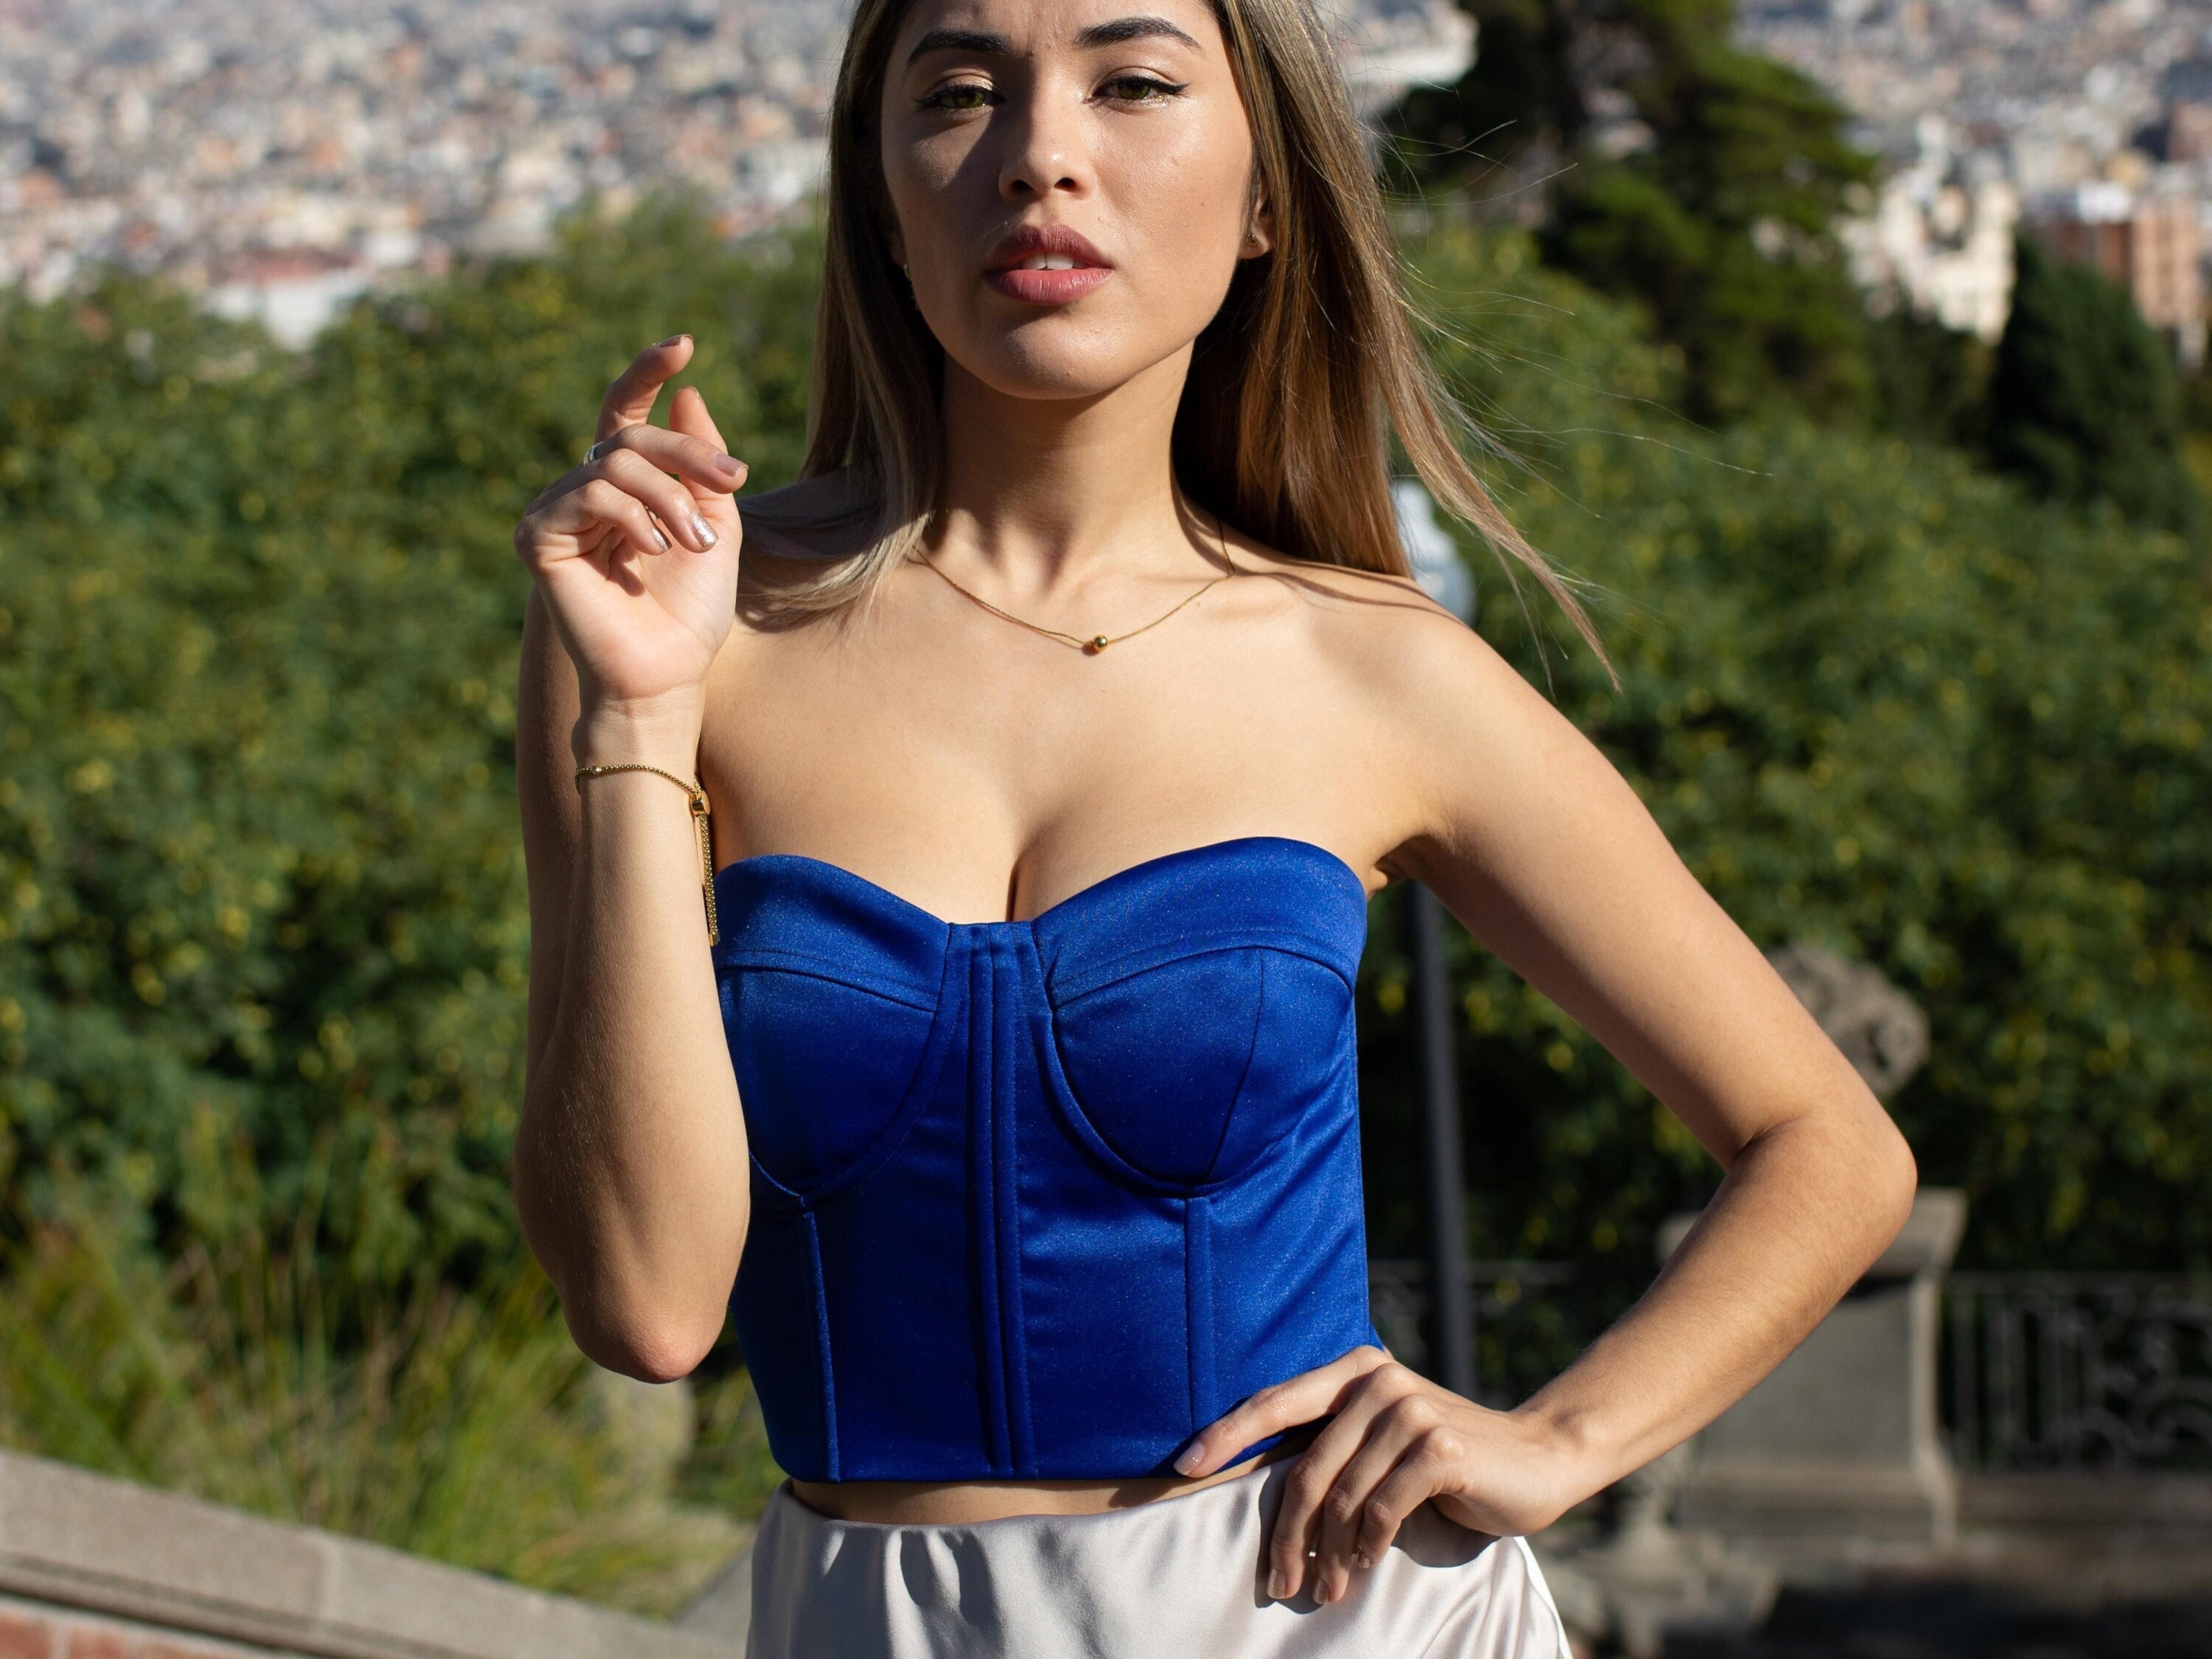 Strapless Royal Blue Corset Bustier/ Retro-style Bustier Top